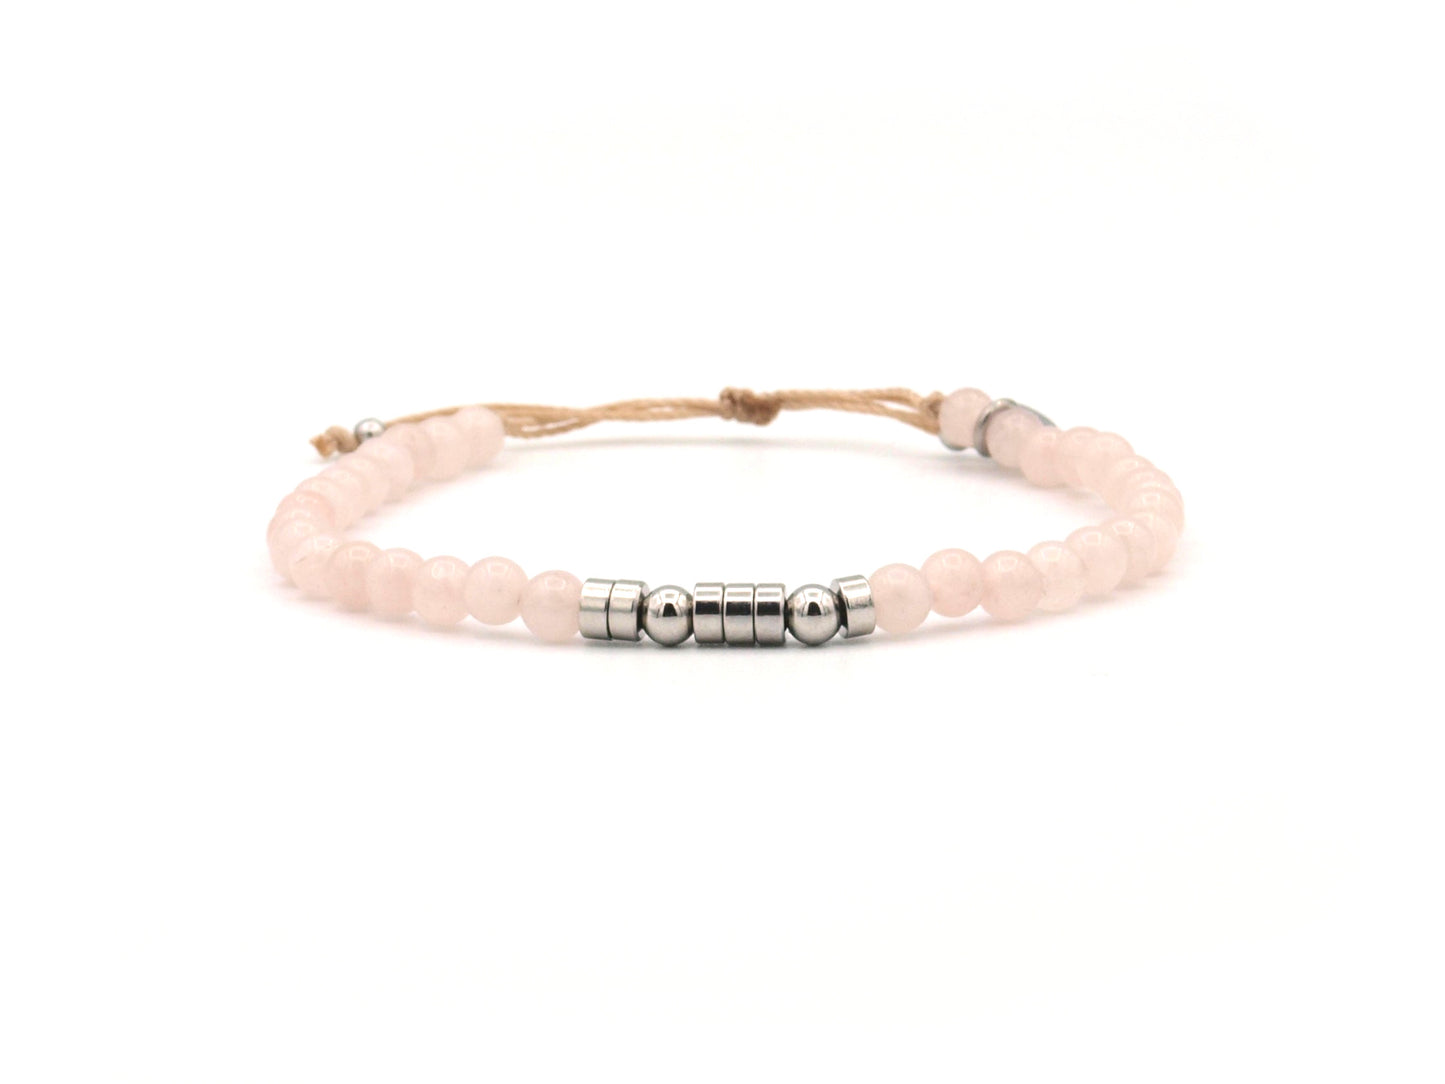 Personalized morse code bracelet, roze quartz and stainless steel